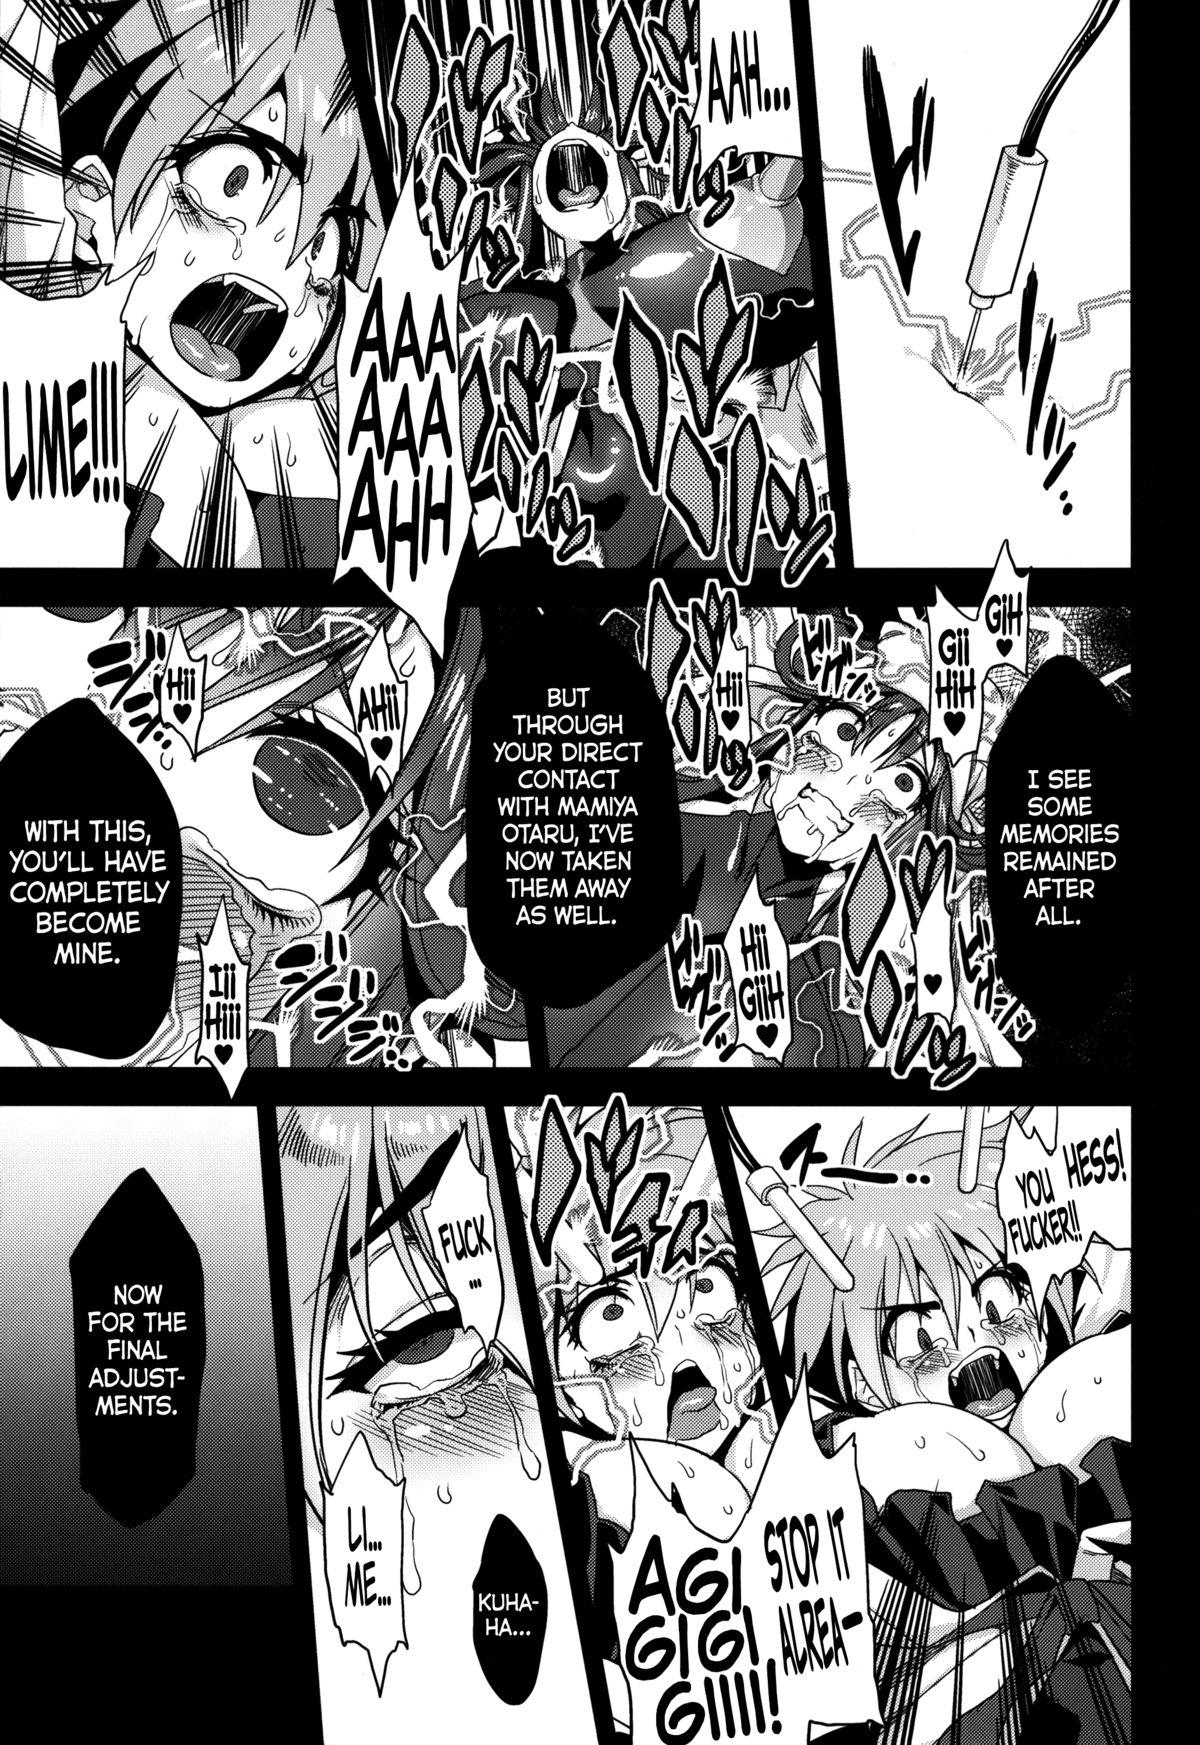 Hard Cock Hentai Marionette 3 - Saber marionette Awesome - Page 10